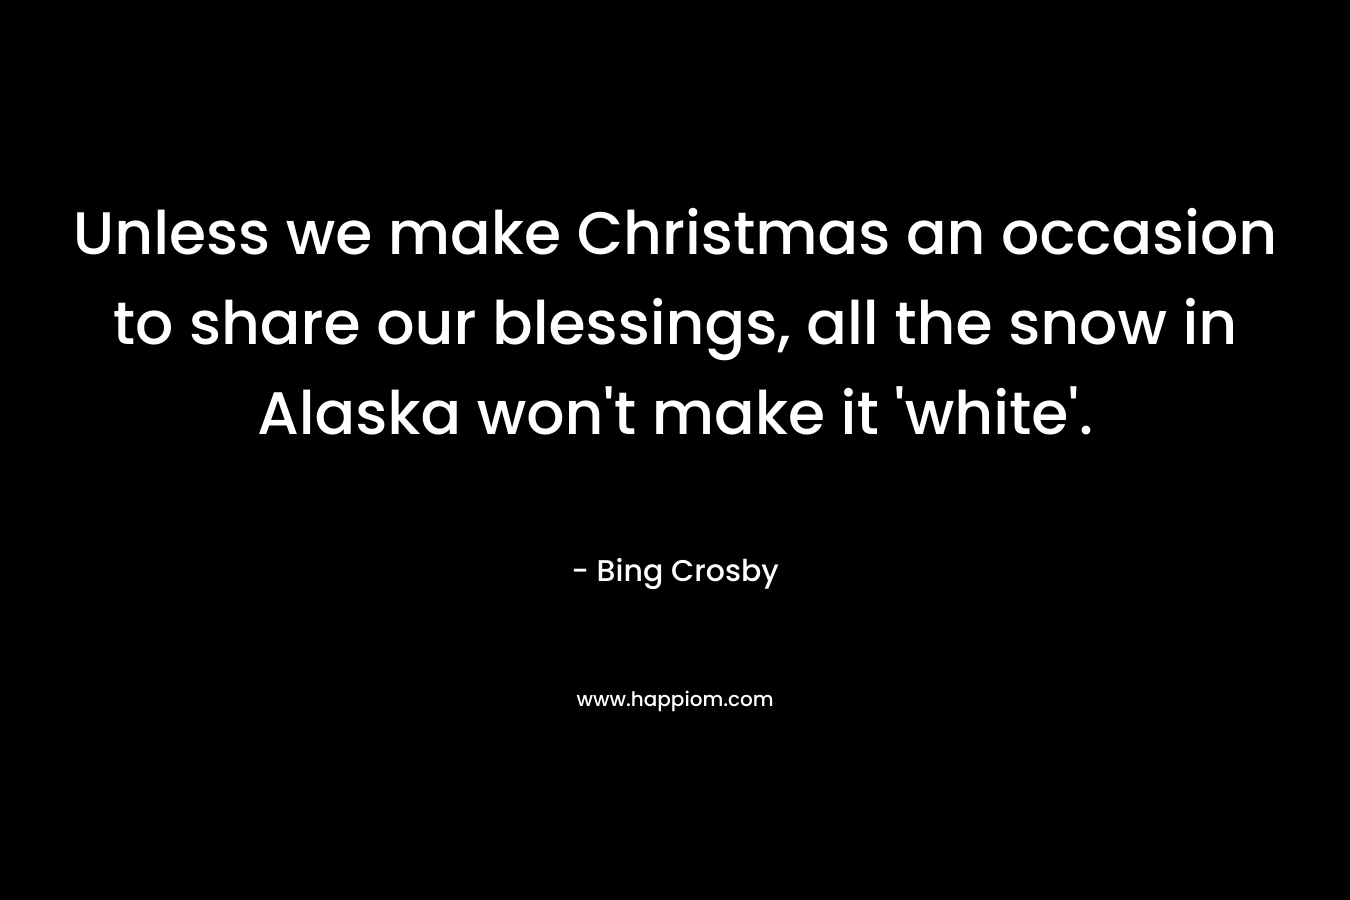 Unless we make Christmas an occasion to share our blessings, all the snow in Alaska won’t make it ‘white’. – Bing Crosby